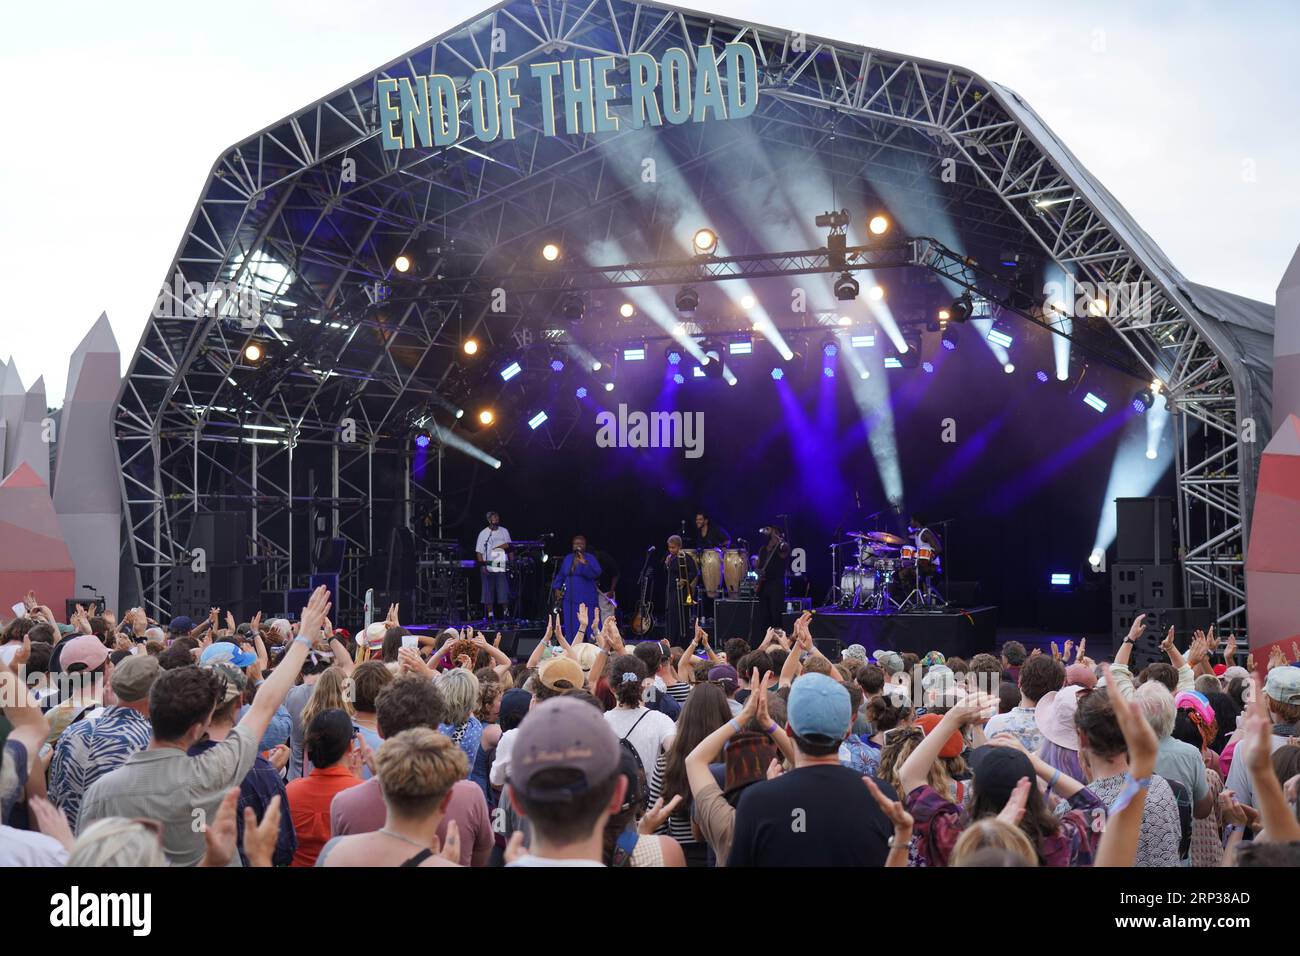 Dorset, UK. Saturday, 2 September, 2023. Kokoroko performing at the 2023 edition of the End of the Road festival at Larmer Tree Gardens in Dorset. Photo date: Saturday, September 2, 2023. Photo credit should read: Richard Gray/Alamy Live News Stock Photo